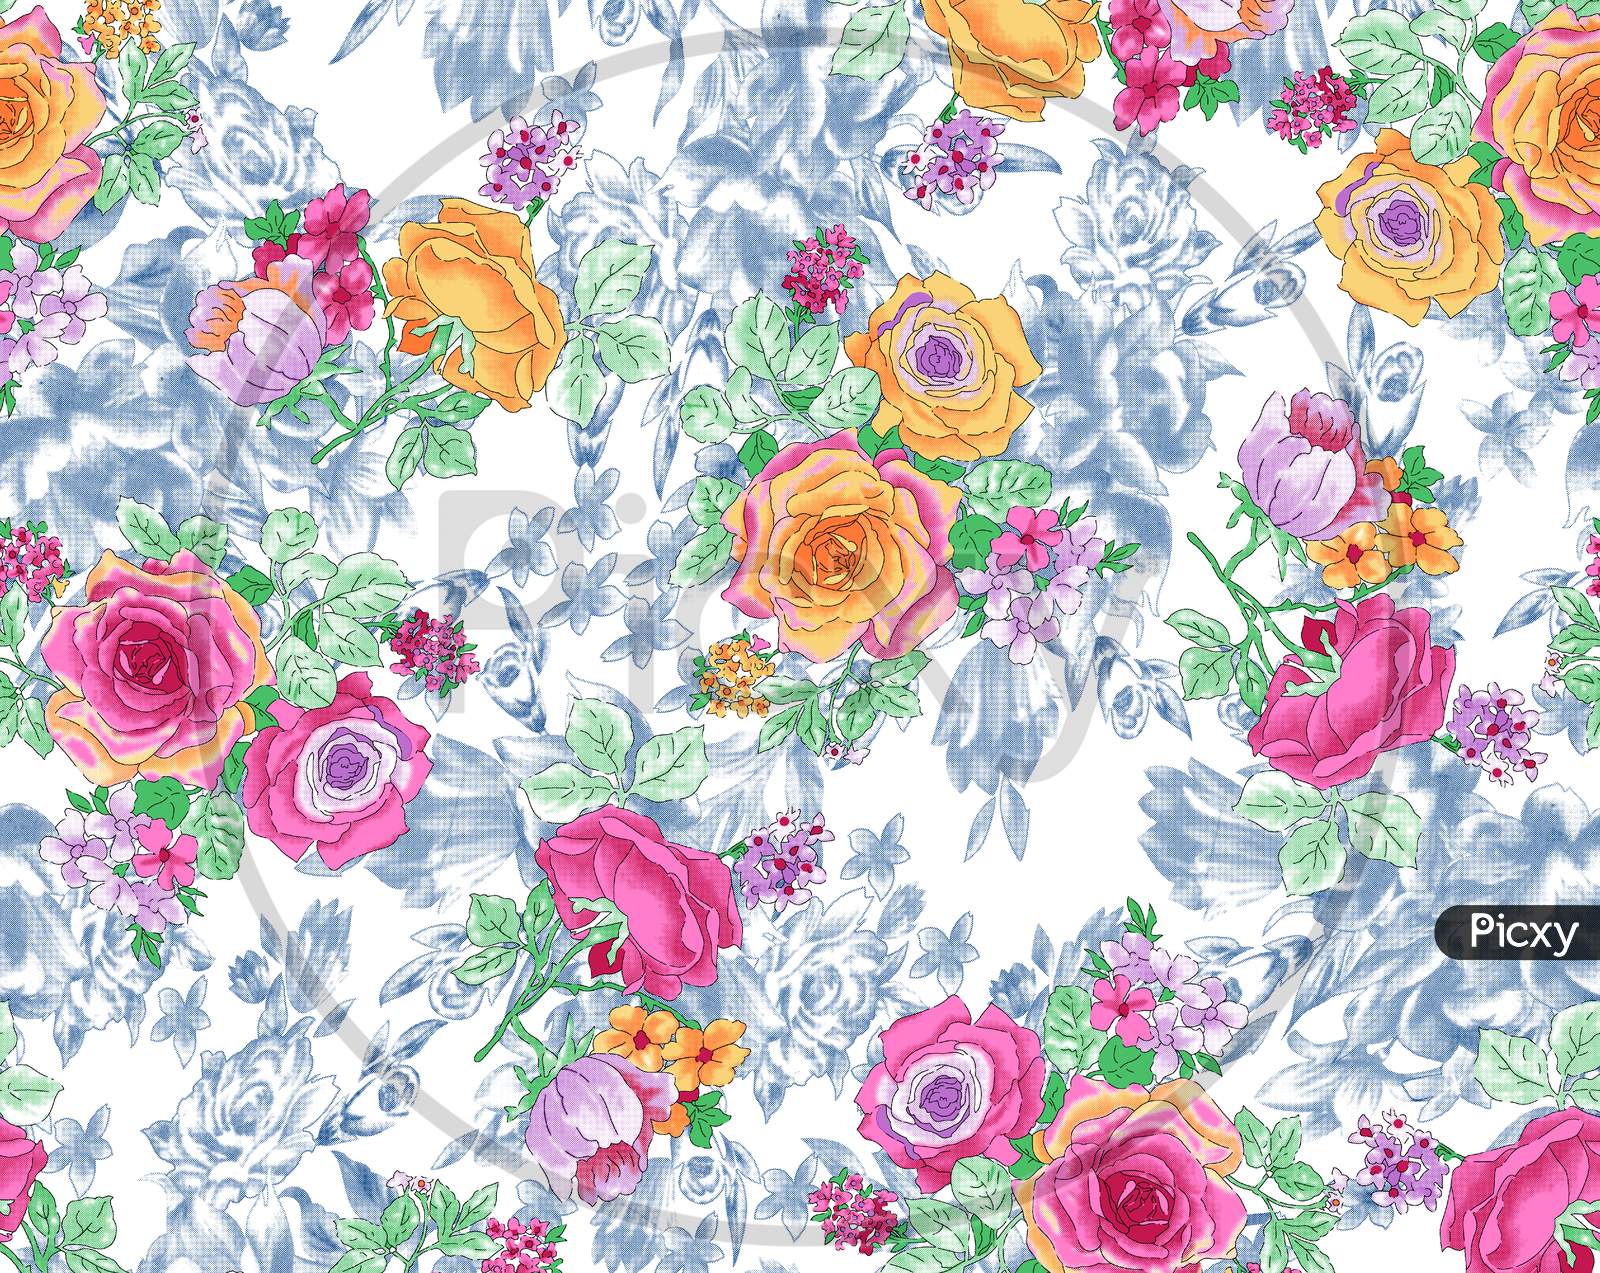 Flowers Background Design In Colorful Art. Creative Background For Print, Textile, Wear, Magazines, Template, Card, Poster, Brochure. Bright Colors